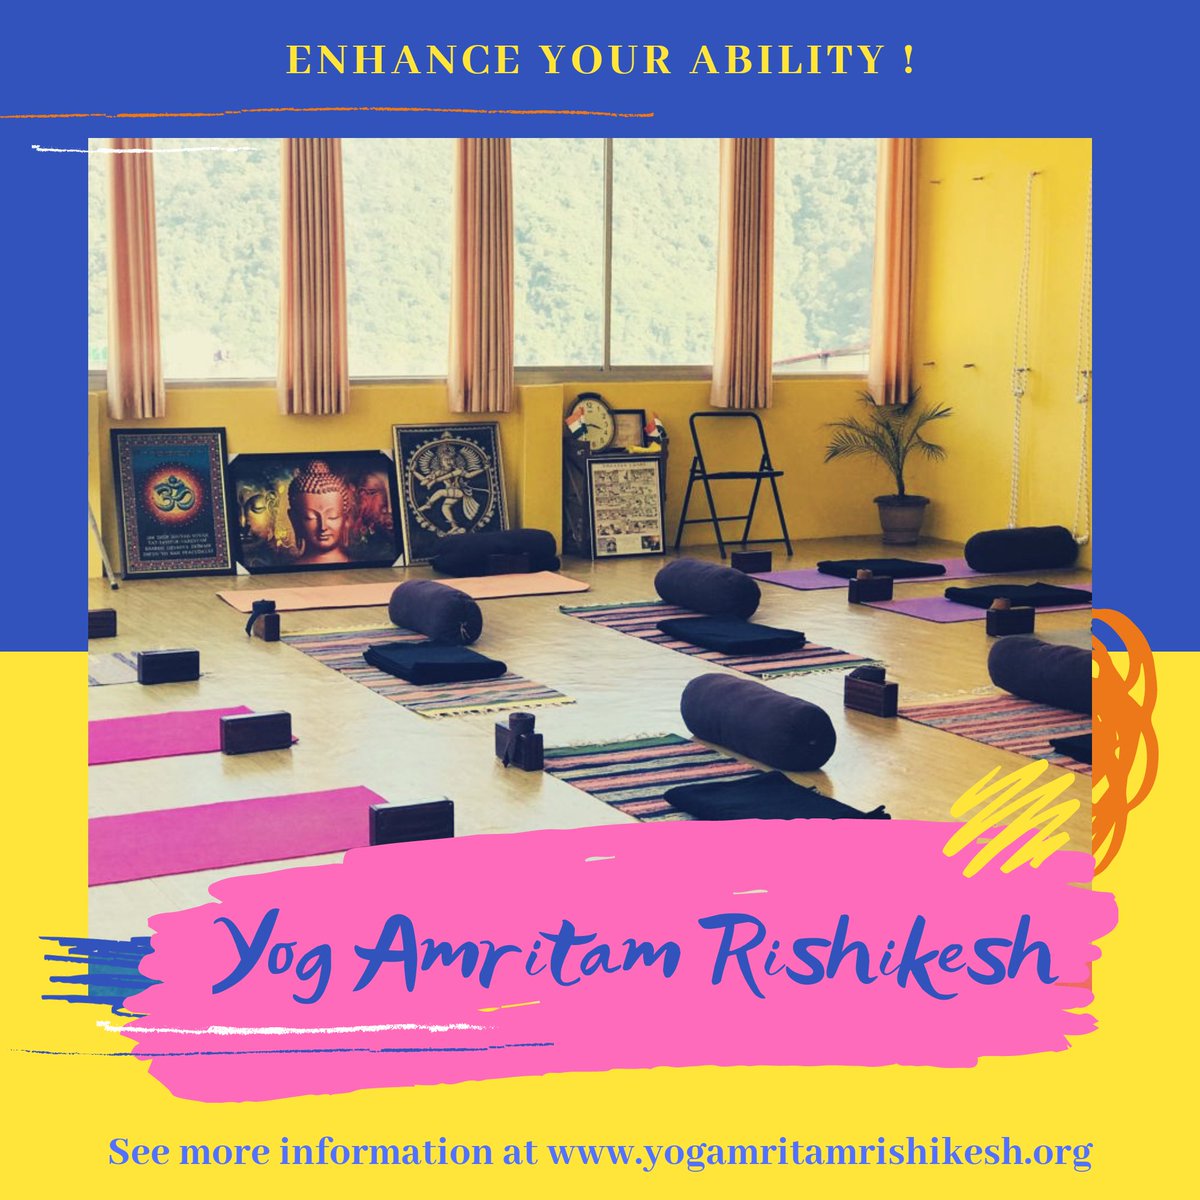 Be Alive Be Strong Be Fit Be Relaxed Be Happy Just Be  In The Moment.

Visit - yogamritamrishikesh.org 

#yoga #yogaeveryday  #YogAmritamFamily  #yogahall #yogamat #yogalover #yogaforall #yogaTTCinIndia🇮🇳 #india #rishikesh #yogainindia #yogaschool #yoga4growth #yogastrength